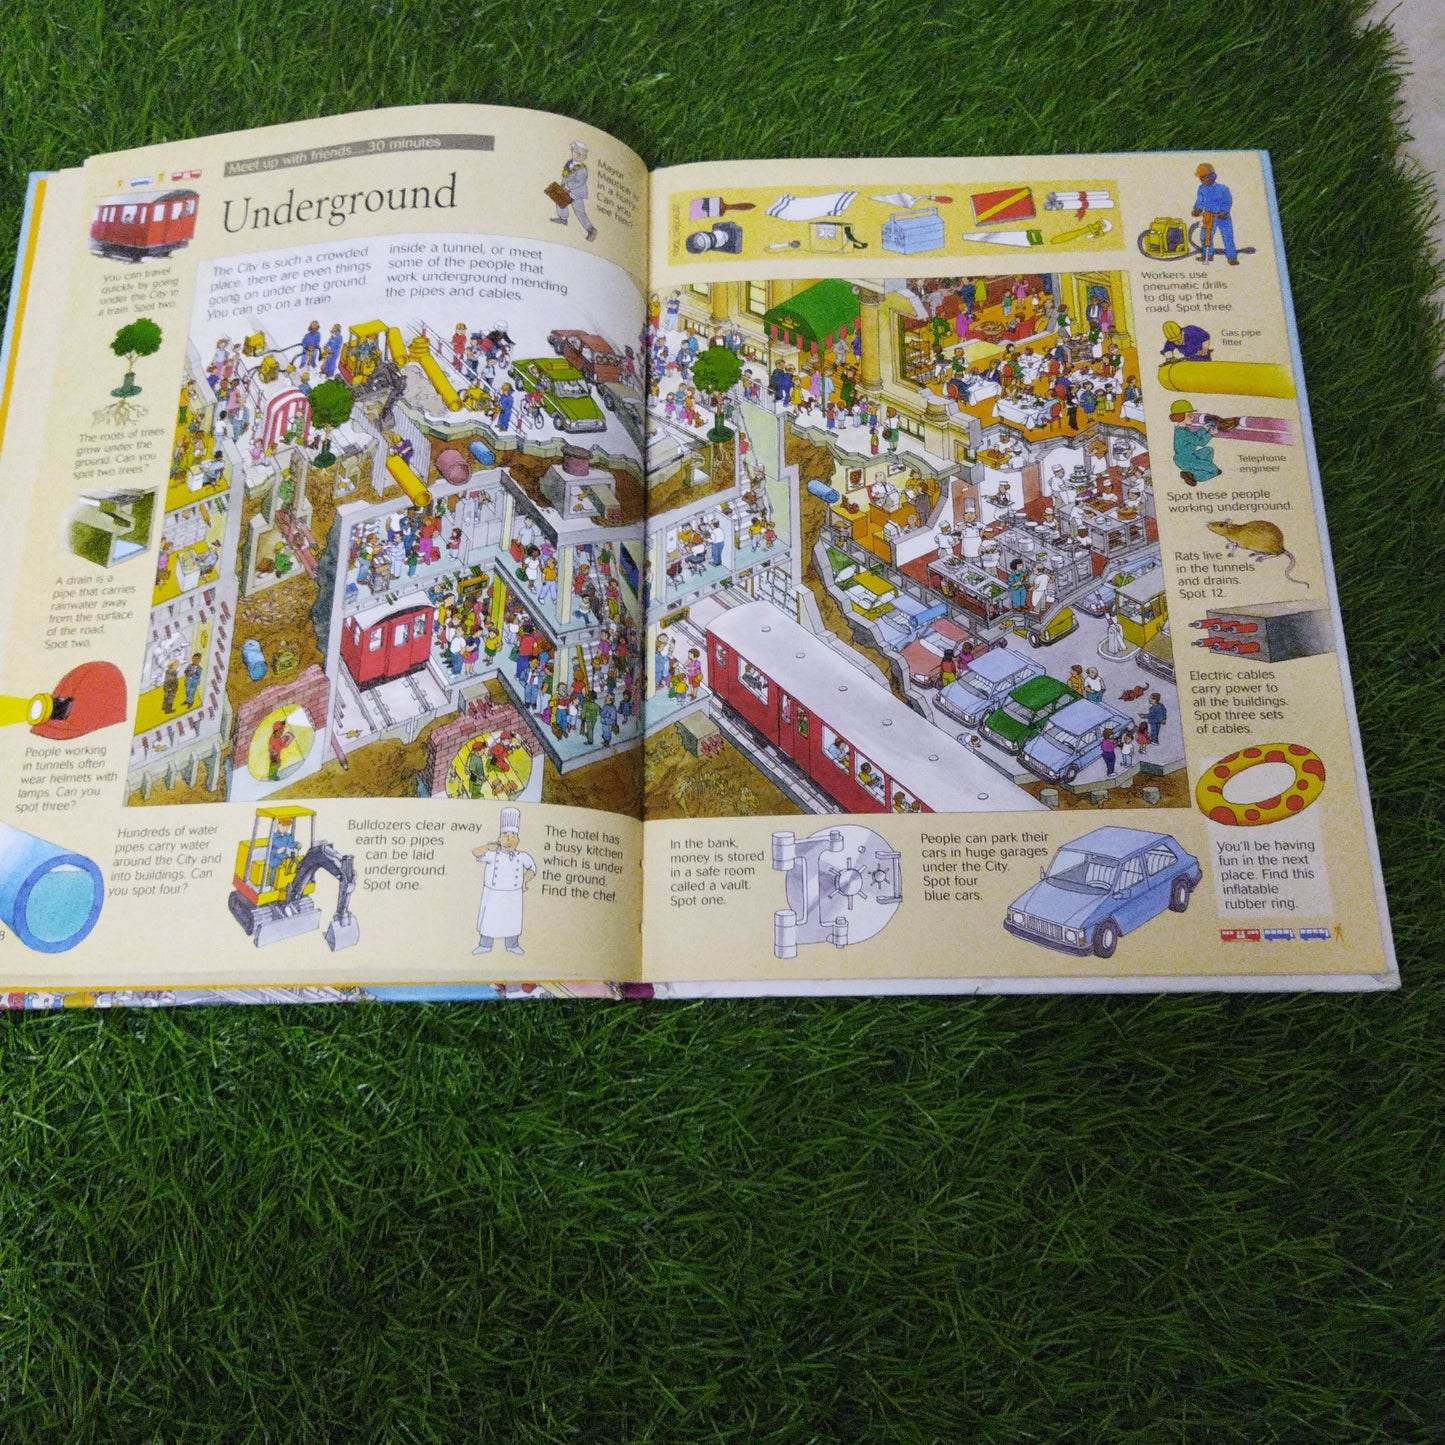 Usborne The Great City Search